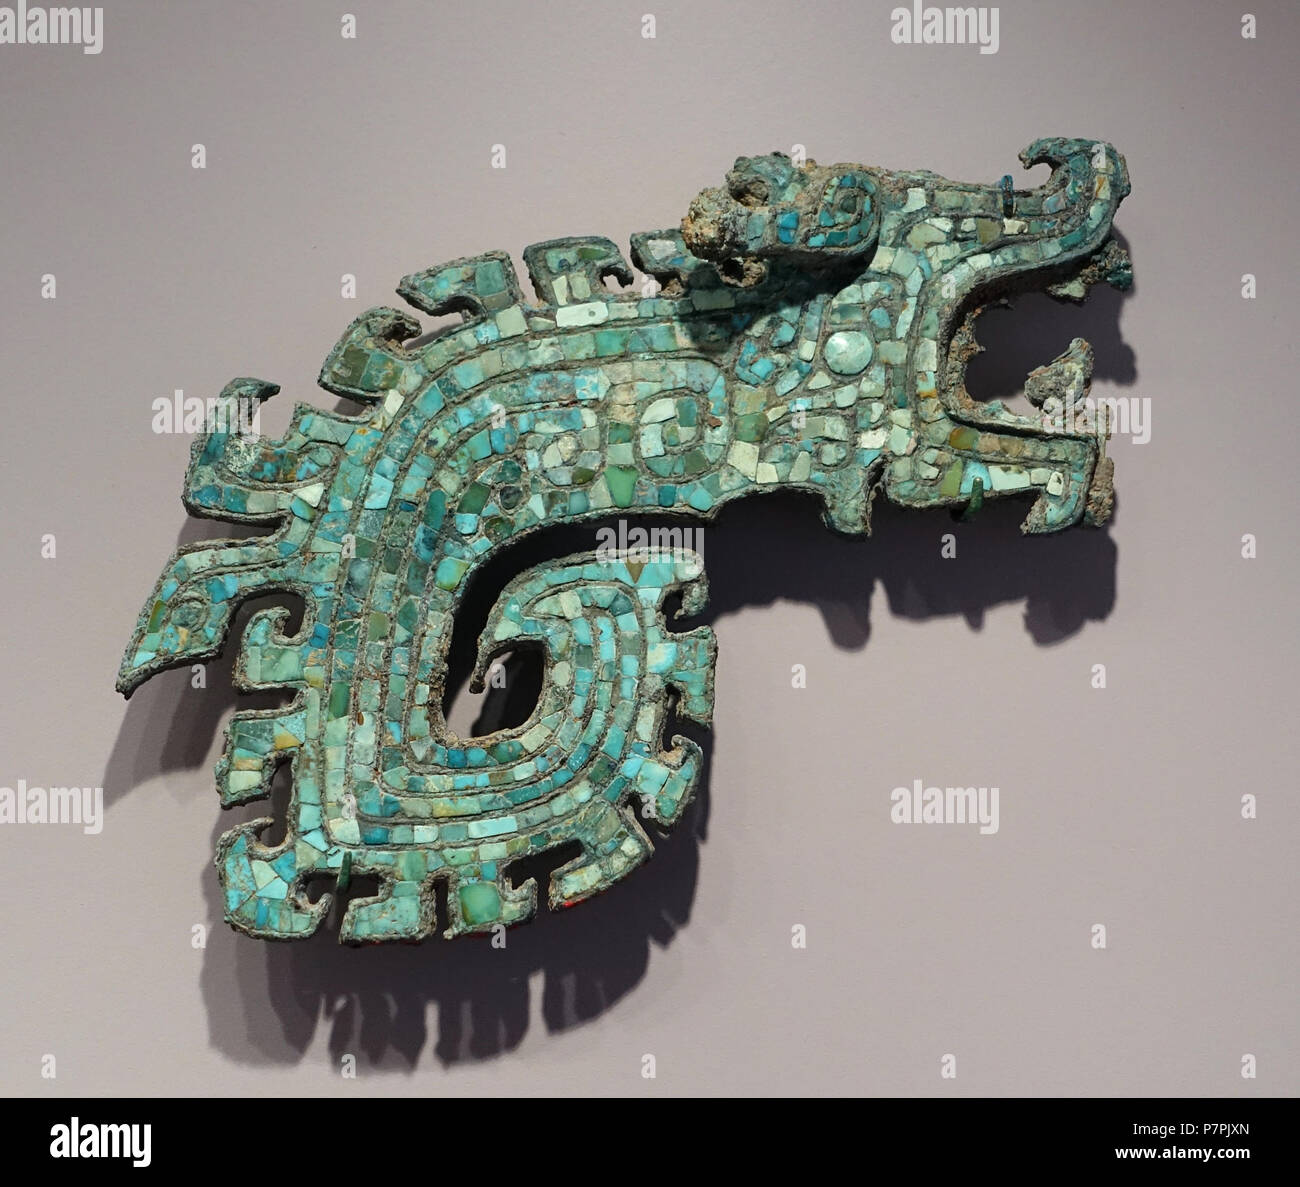 N/A. N/A 398 Weapon Handle in the Form of a Dragon, China, Shang dynasty, 14th-11th century BC, bronze with turquoise inlay - Arthur M. Sackler Museum, Harvard University - DSC00788 Stock Photo